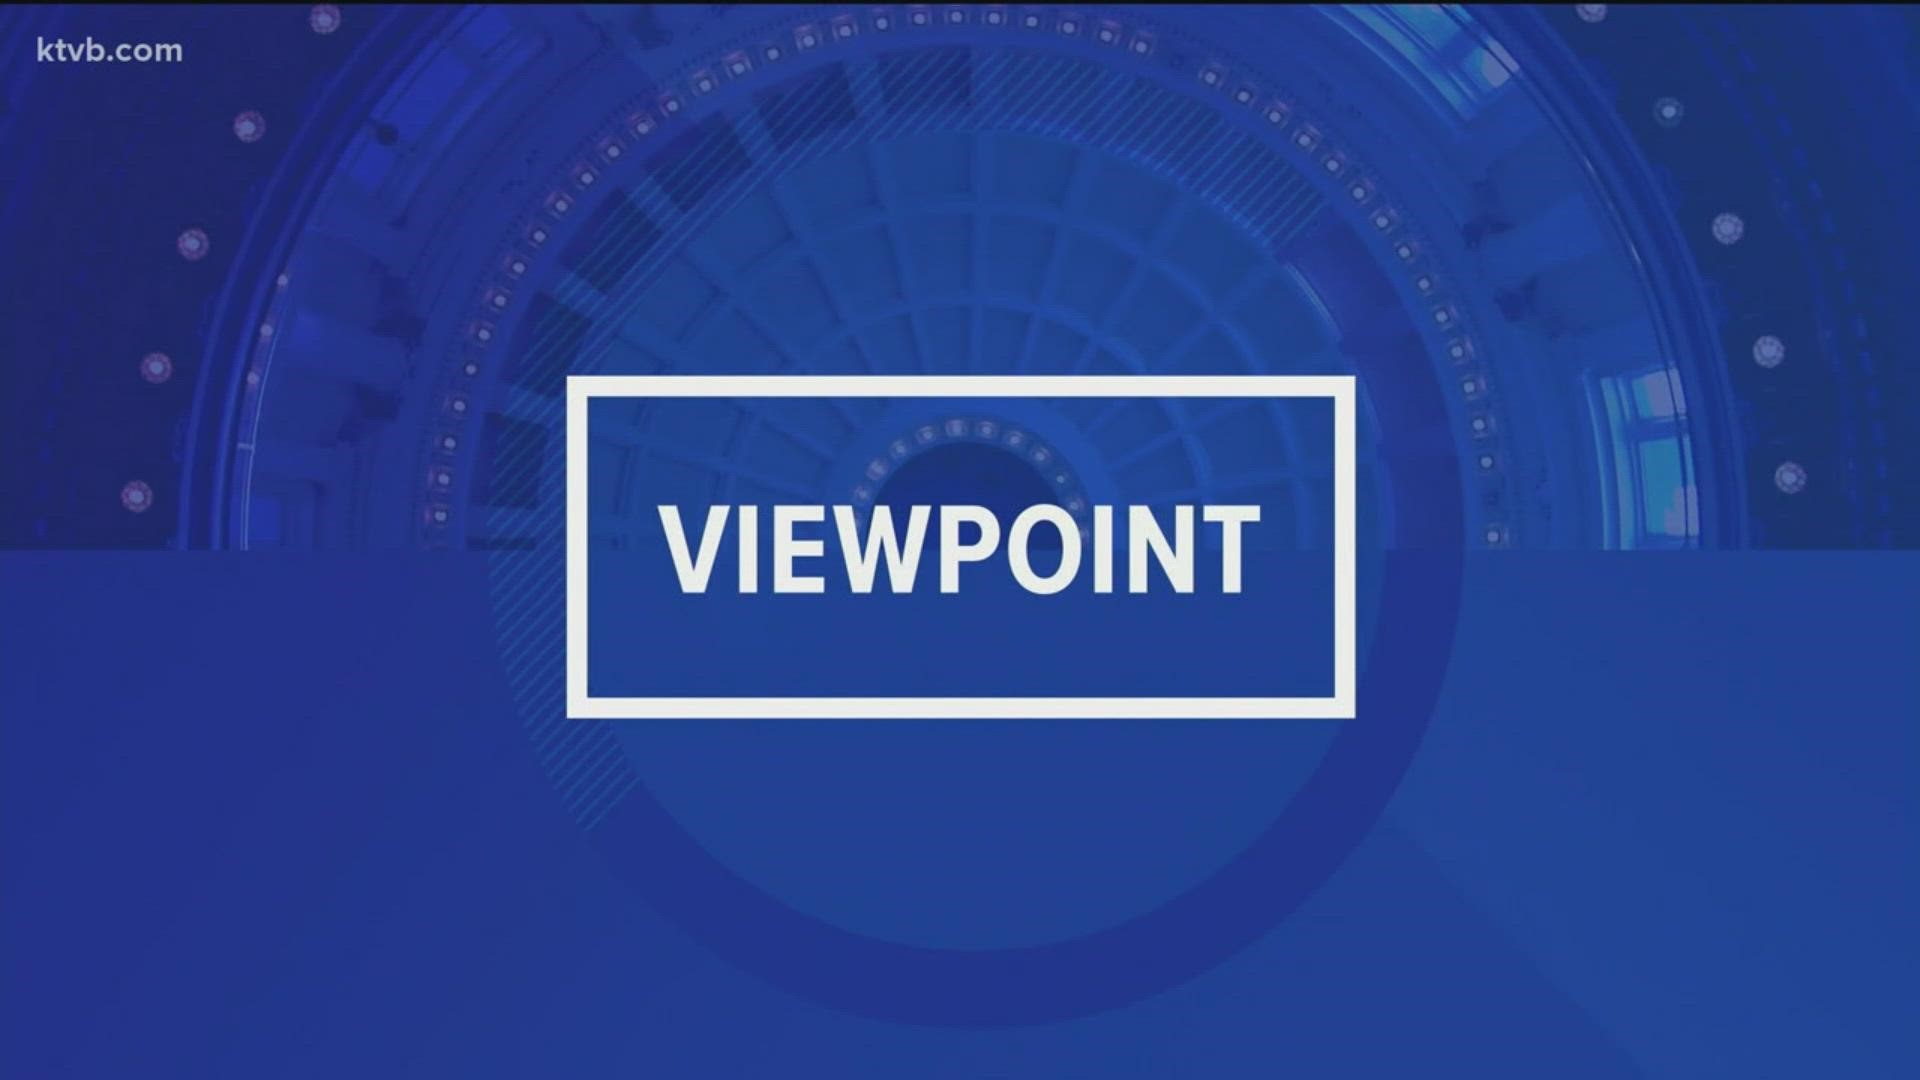 On this week's Viewpoint, Gov. Little explains his decision to keep Idaho in Stage 4 of reopening and discusses the plan for reopening public schools.